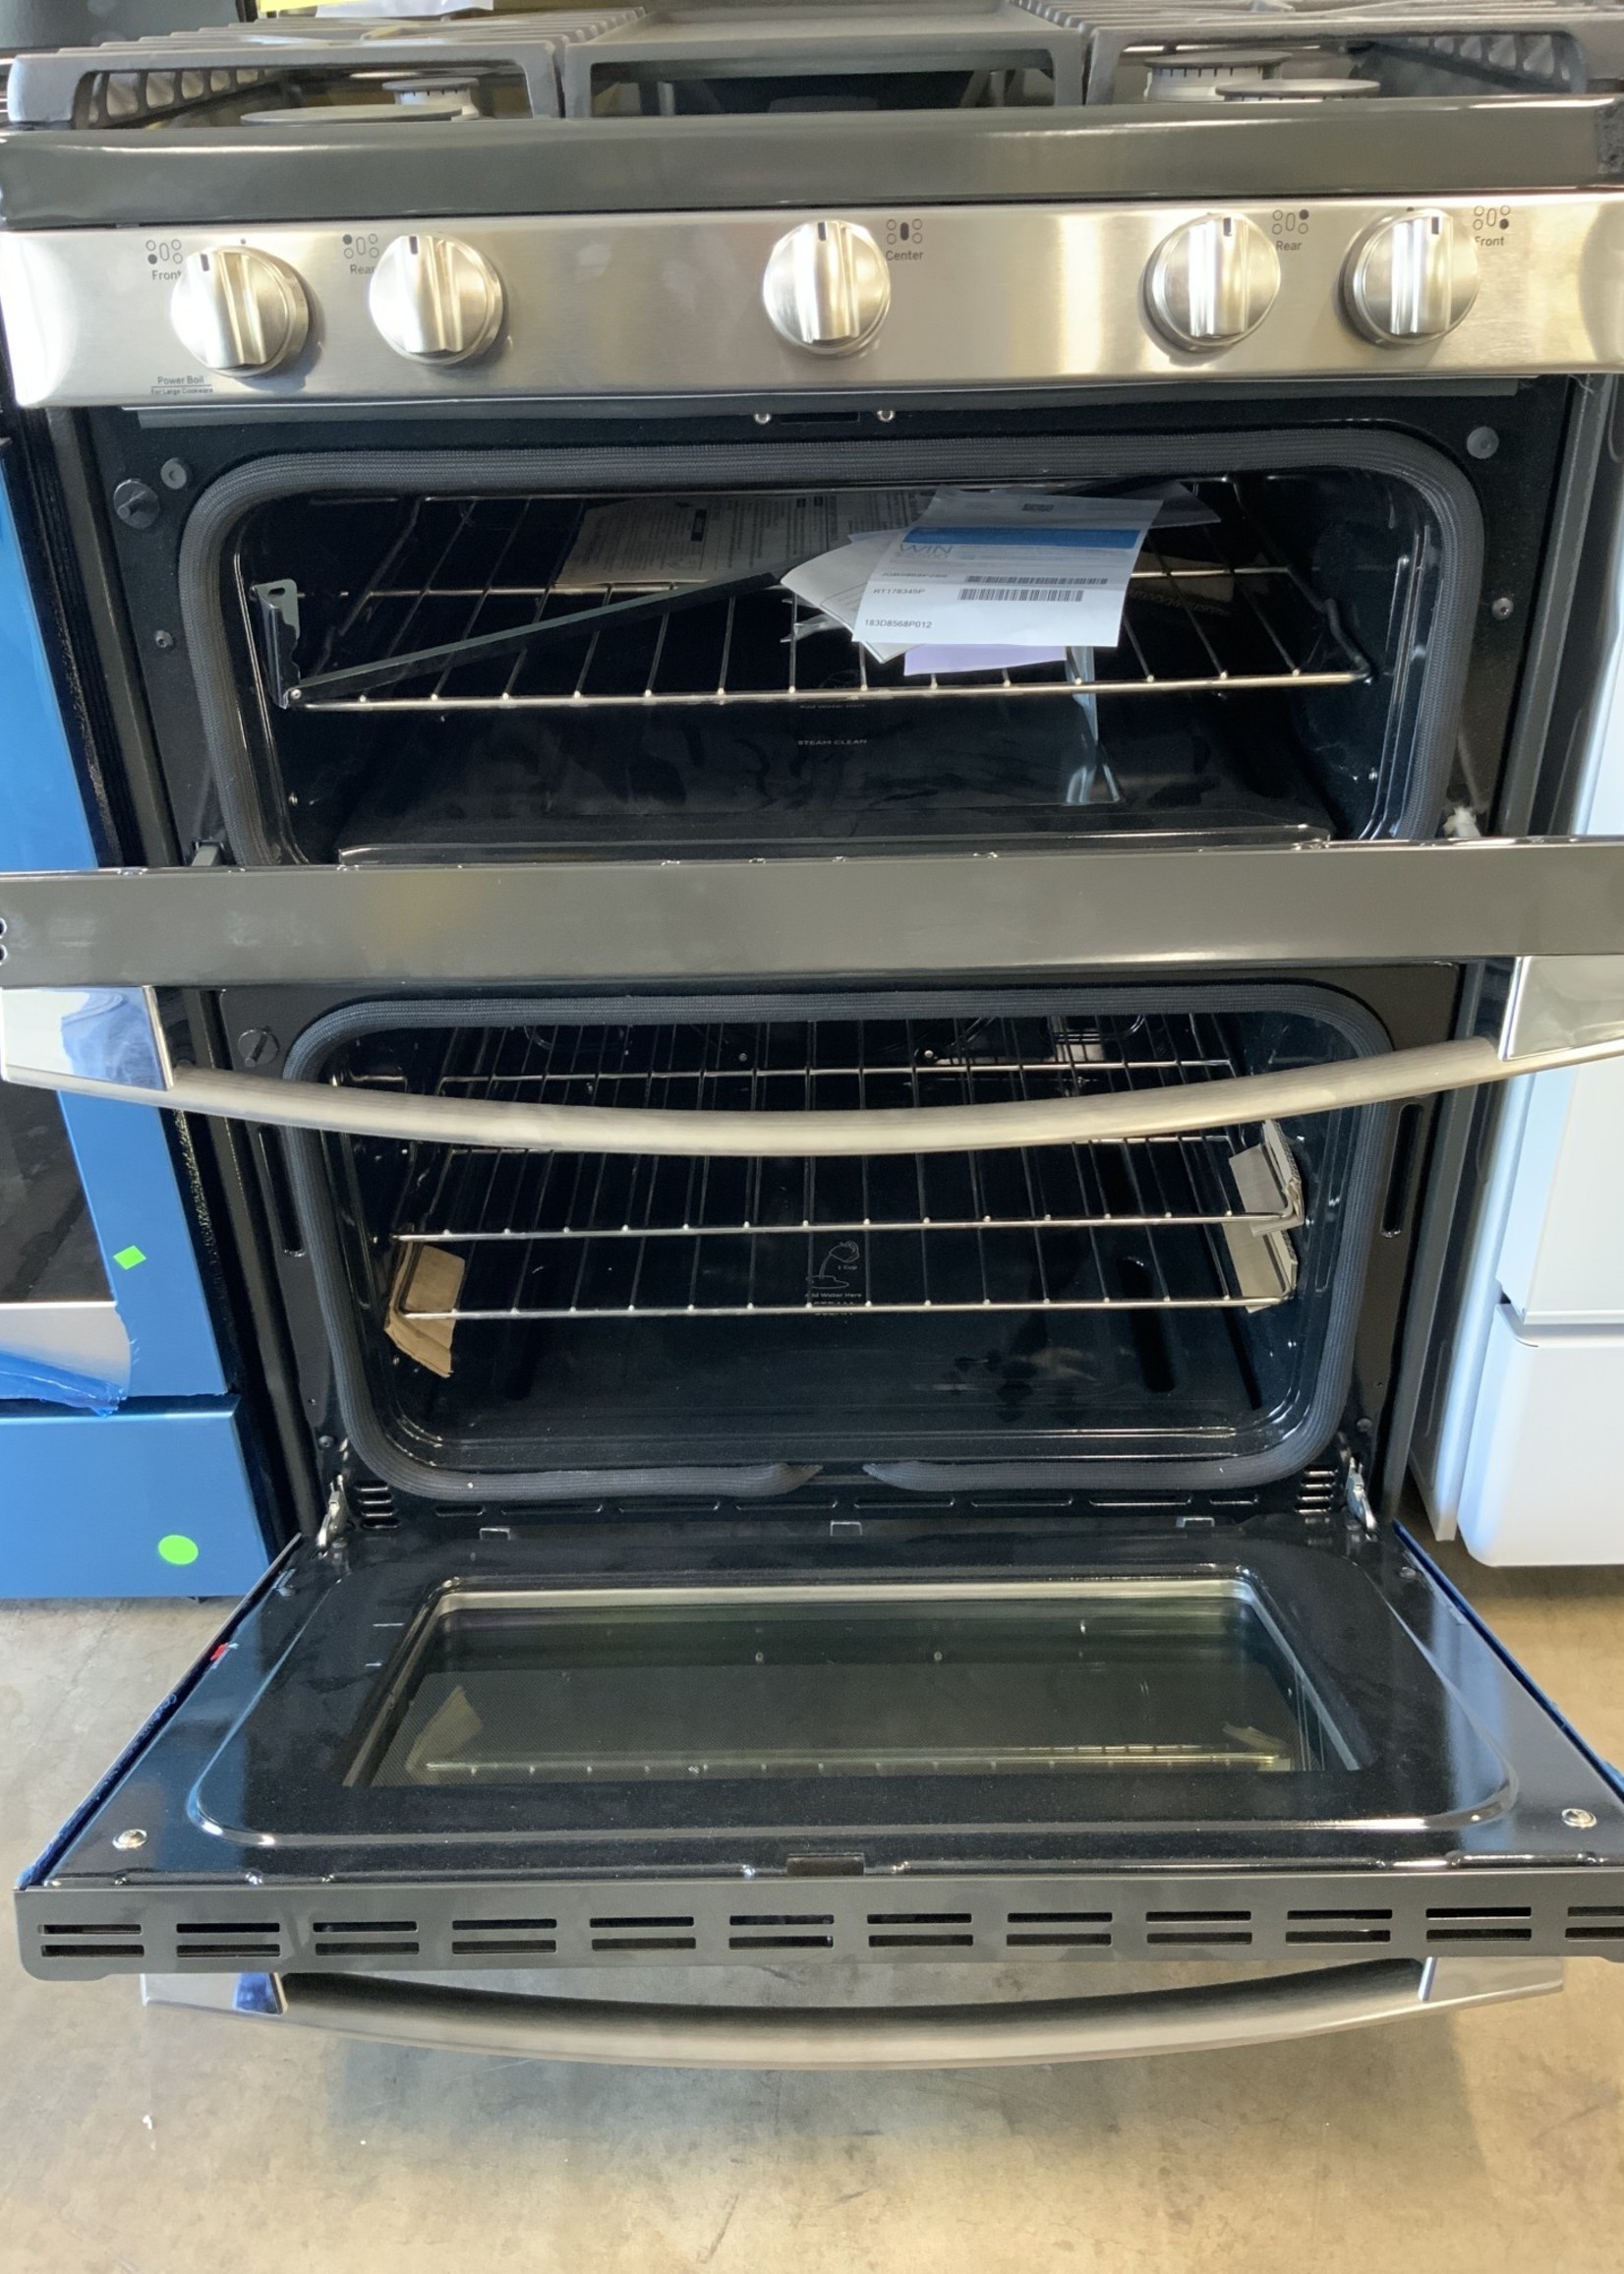 GE GE® 30" Free-Standing Gas Double Oven Convection Range